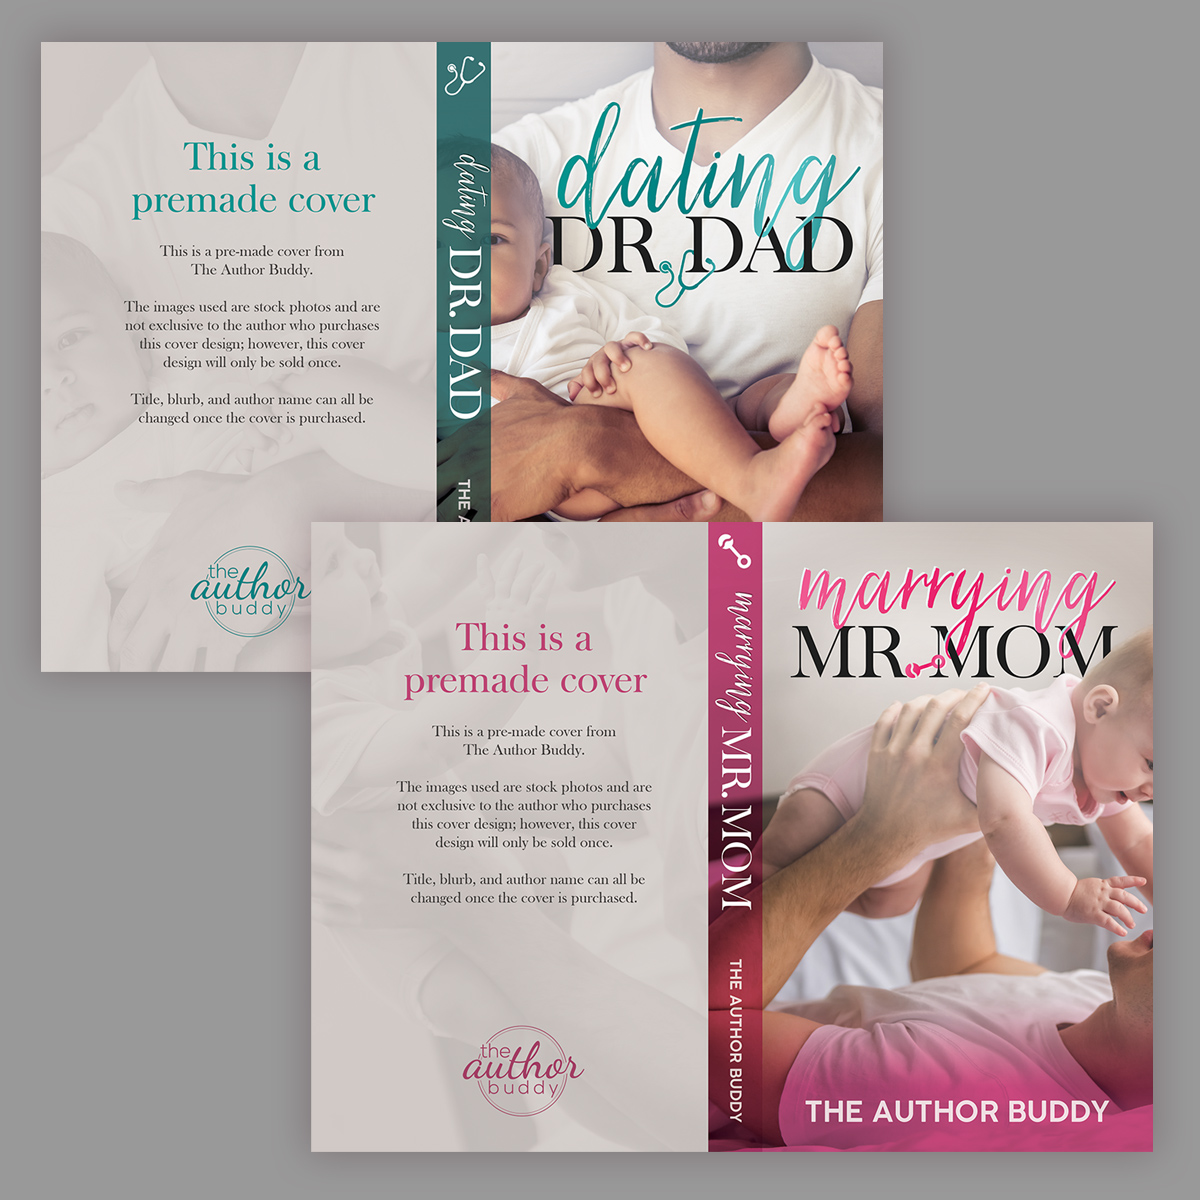 Dating Dr. Dad / Marrying Mr. Mom - Premade Single Dad Covers Duo from The Author Buddy